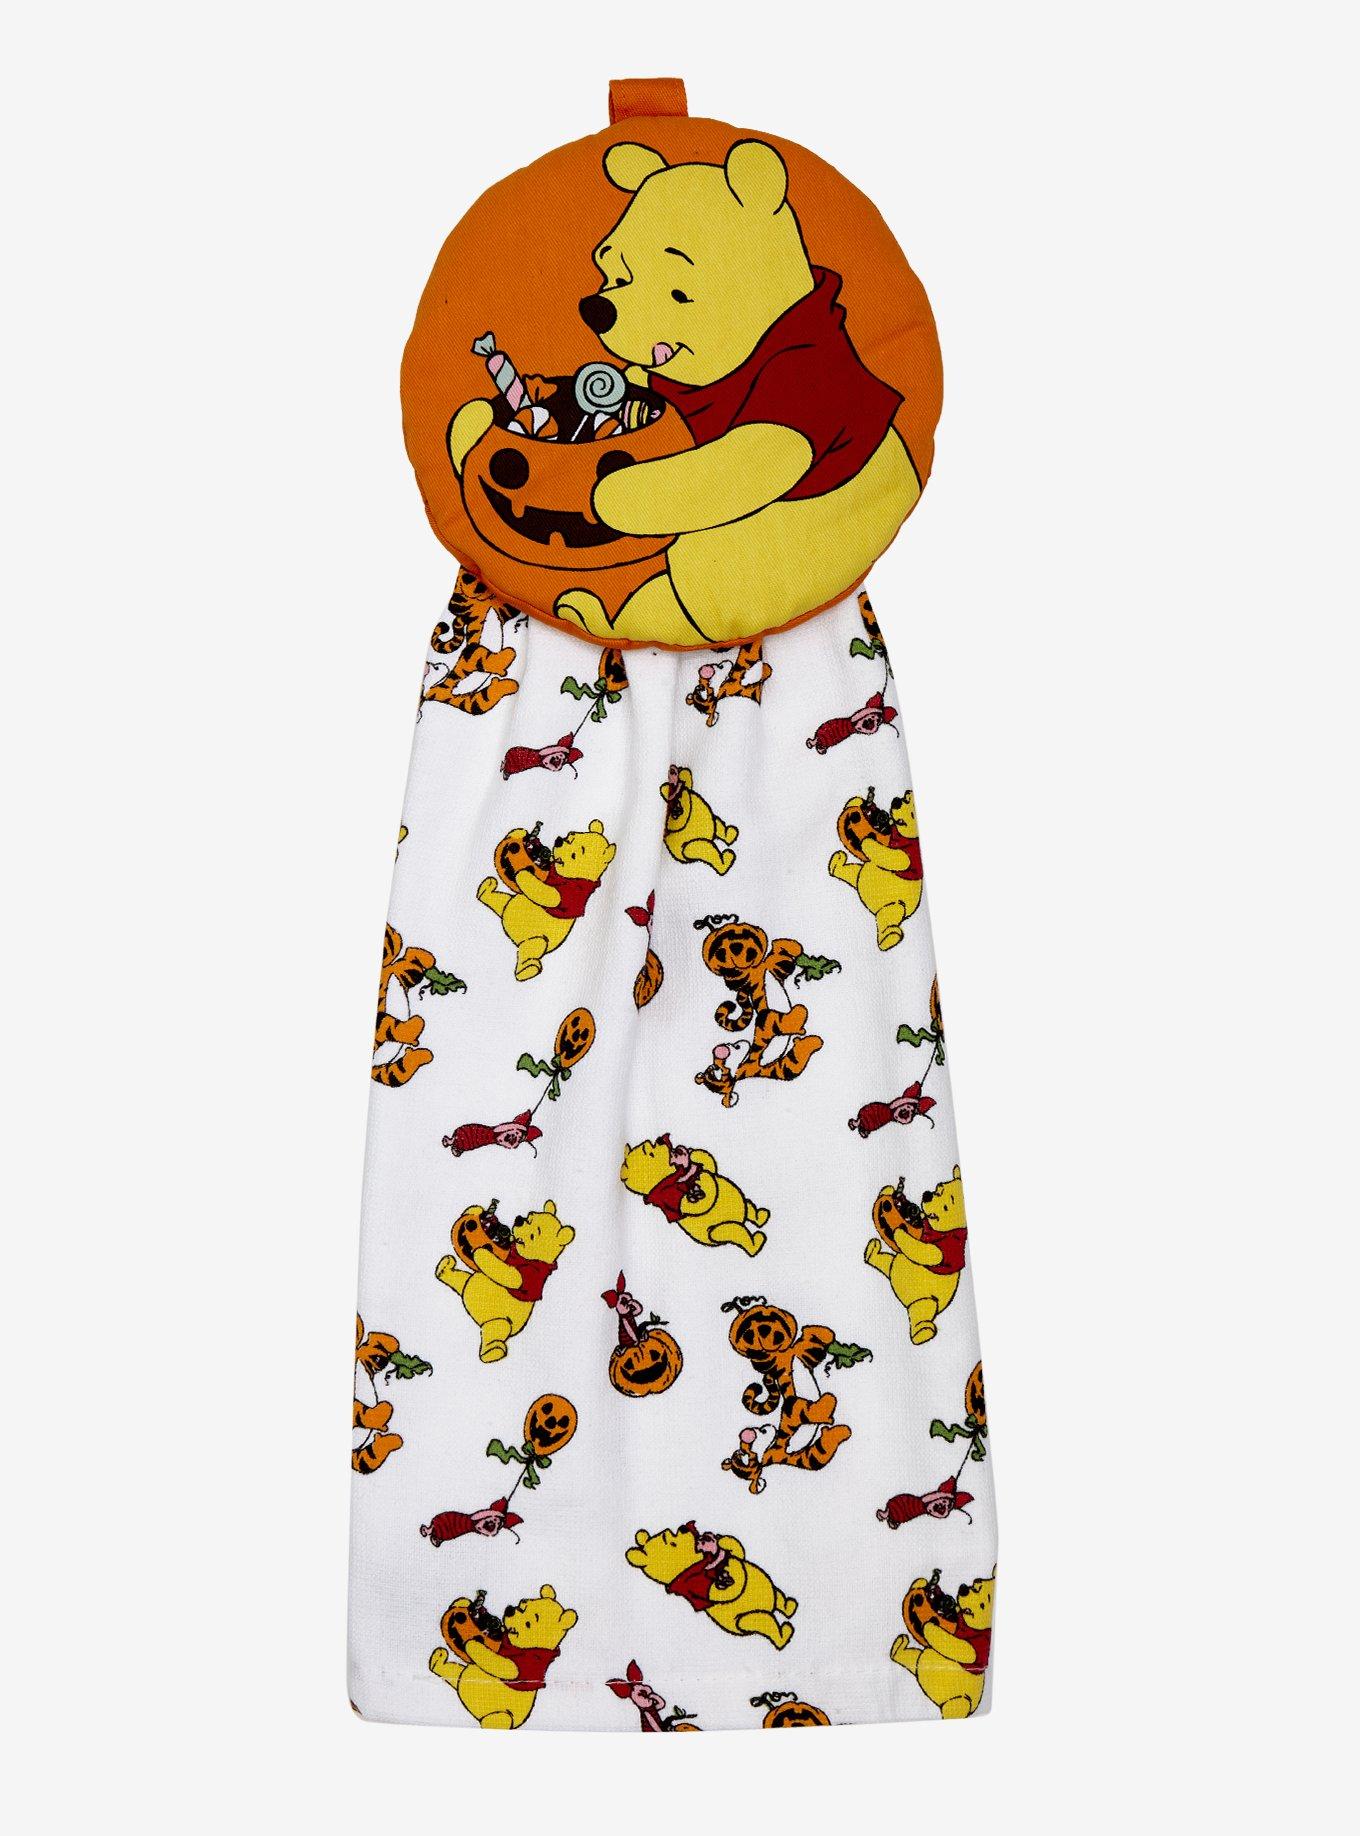 Disney Winnie The Pooh And Friends Panels Hand Towel by Leylan Catrin -  Pixels